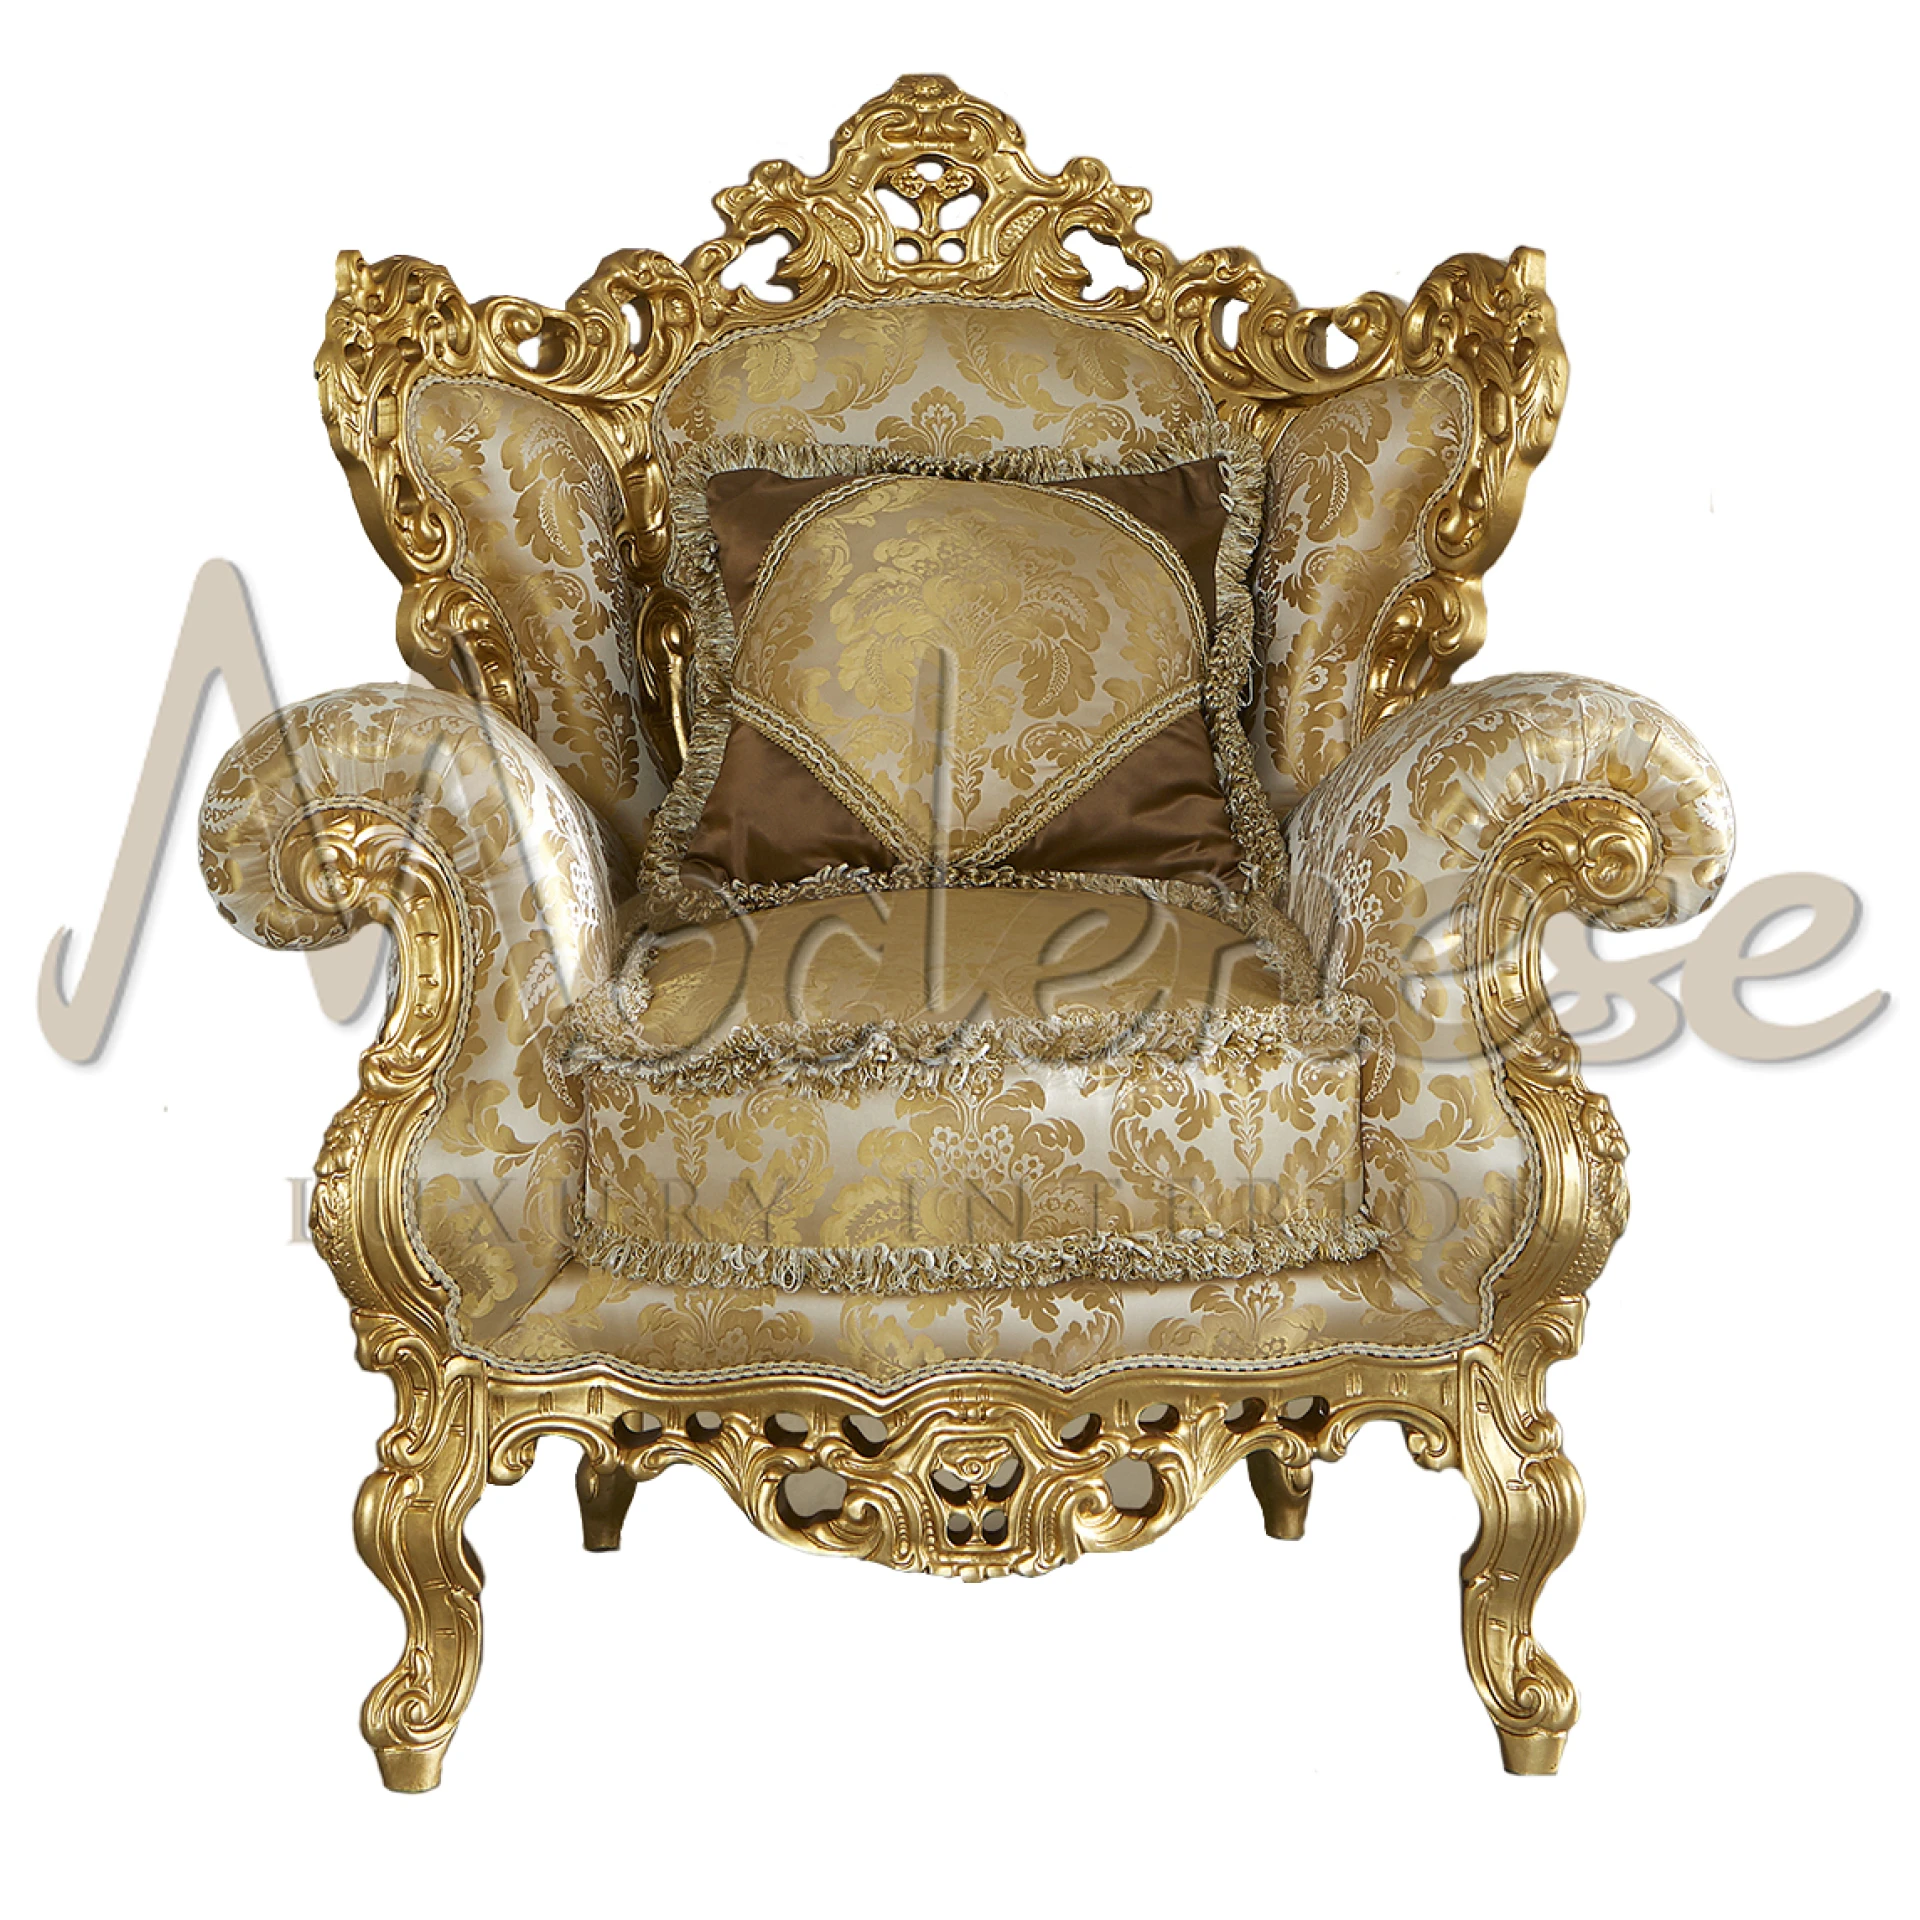 Luxurious Baroque Armchair with gold leaf carvings, showcasing Italian craftsmanship for a royal and elegant interior design.
